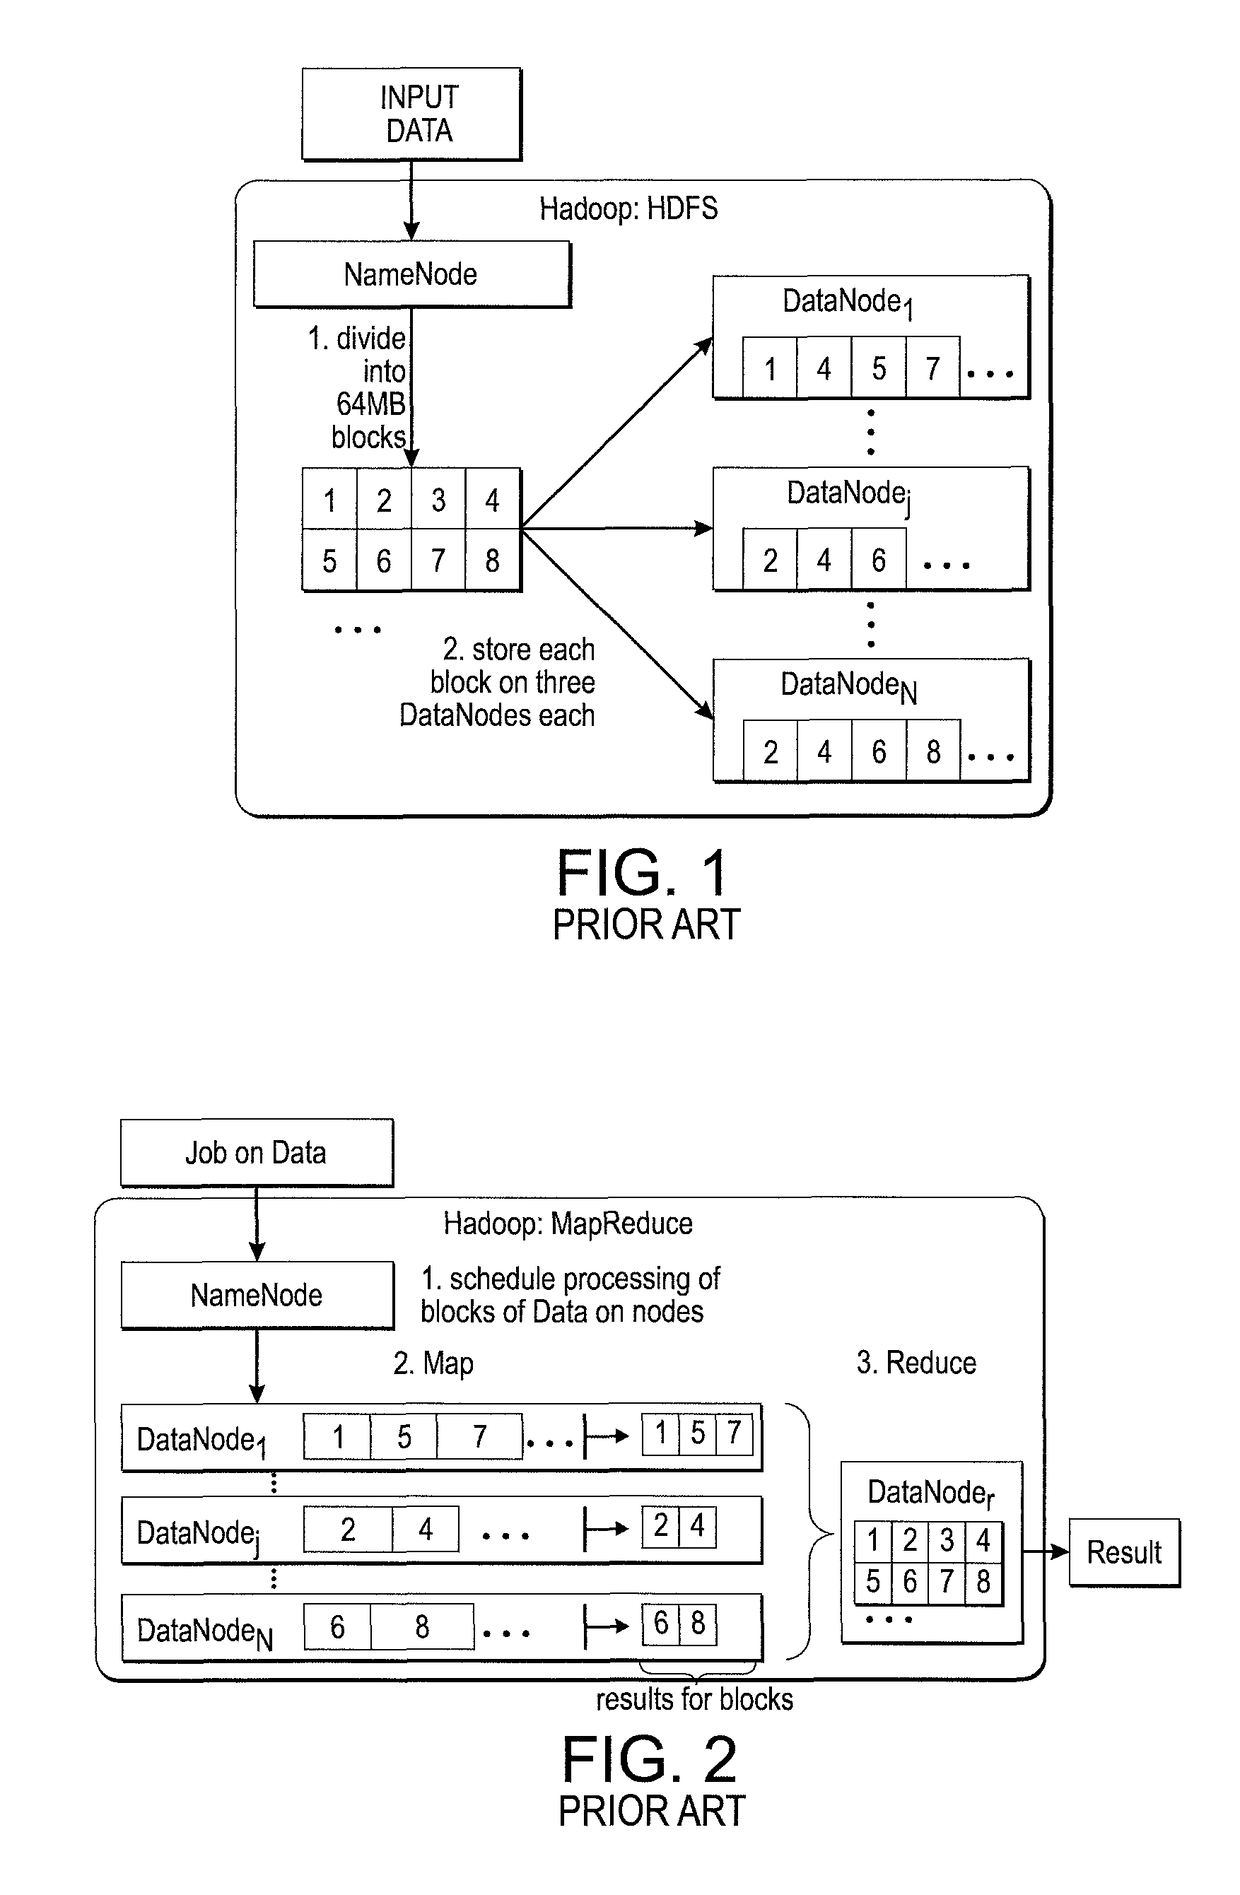 System and method for efficient task scheduling in heterogeneous, distributed compute infrastructures via pervasive diagnosis